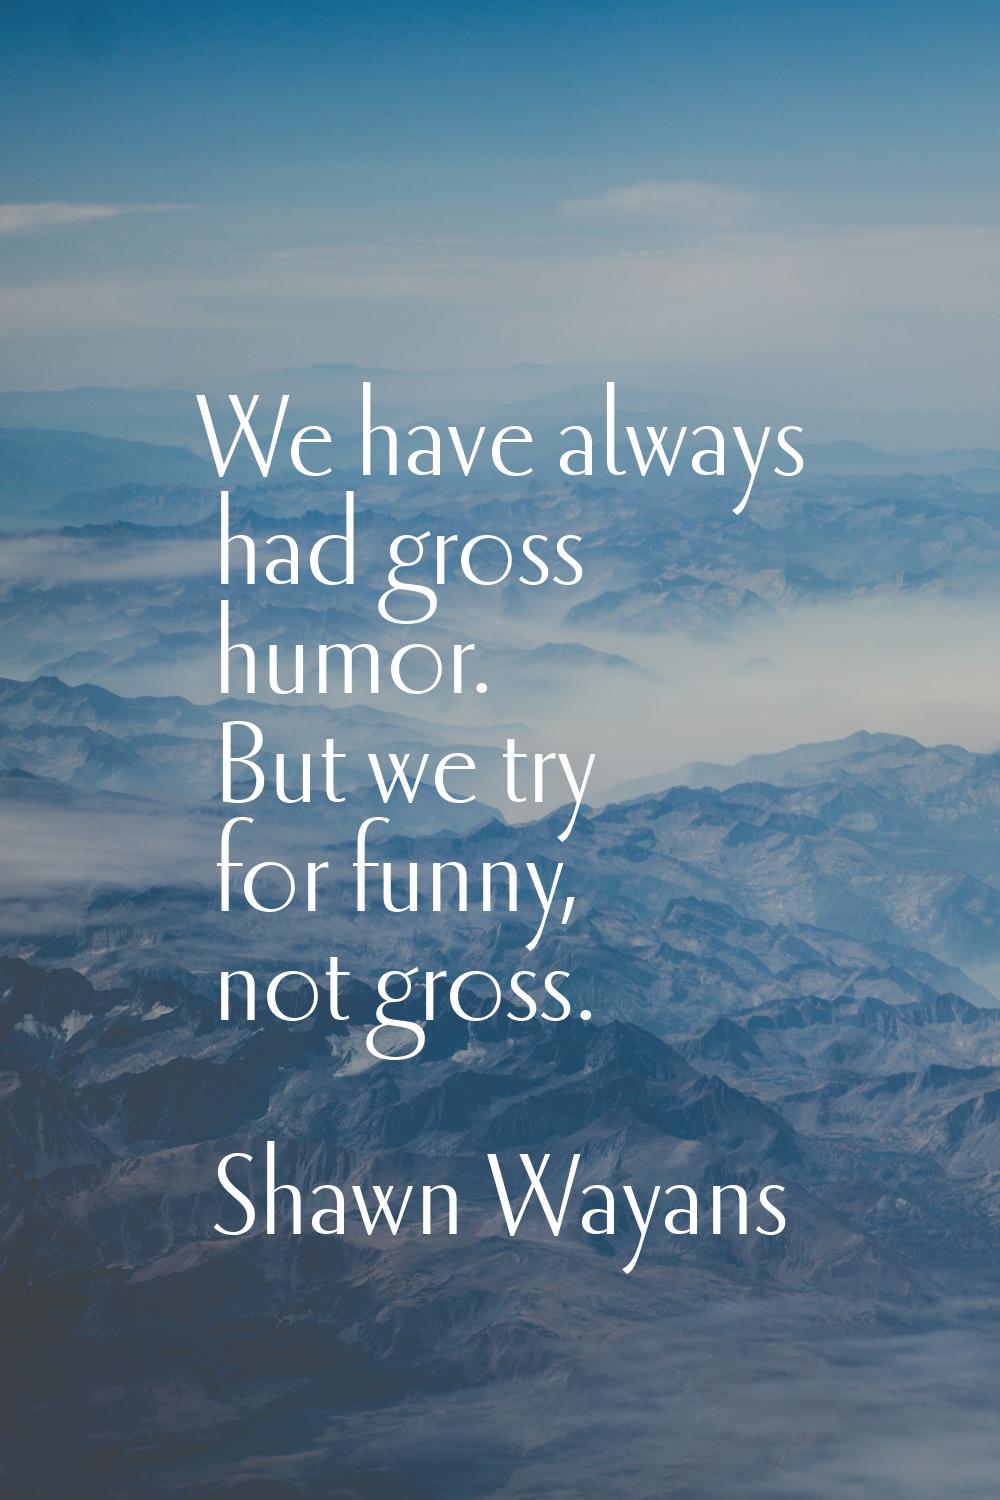 We have always had gross humor. But we try for funny, not gross.